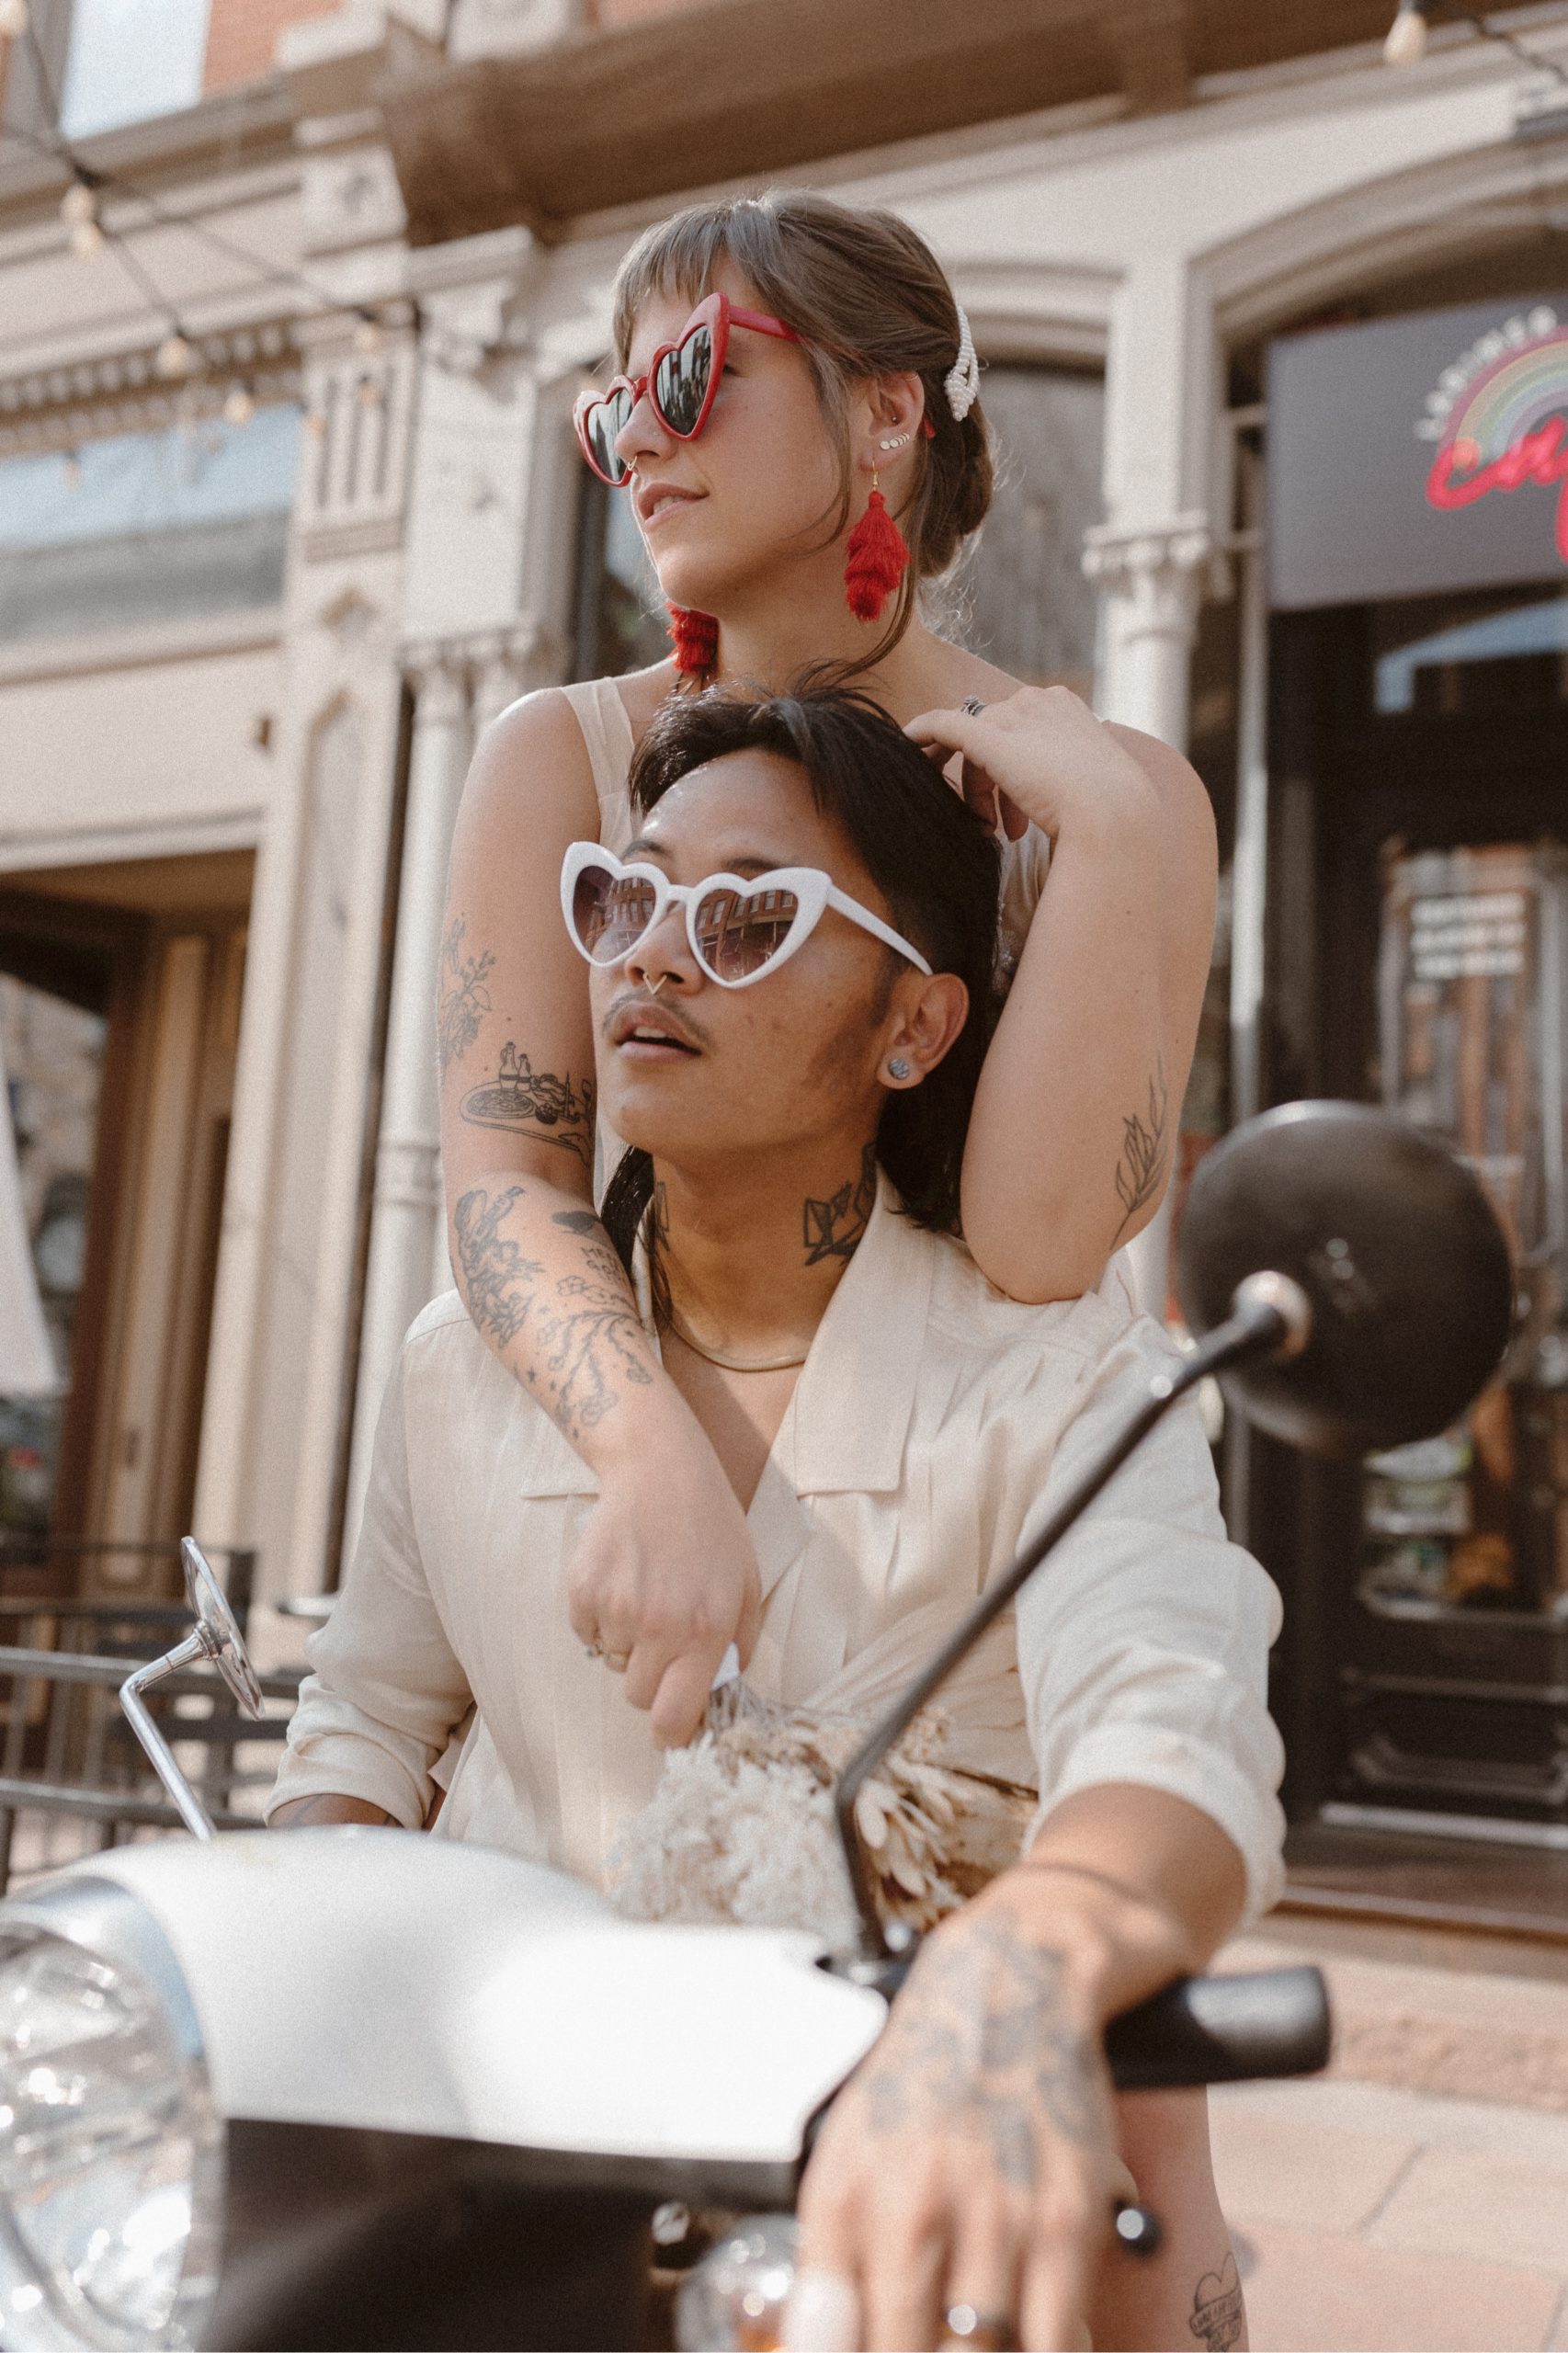 A romantic Italian-inspired downtown Denver elopement, complete with vintage outfits and an Italian scooter. Set in Larimer Square in downtown Denver. Photo by Denver elopement photographer, Ashley Joyce Photography, copyright 2022.